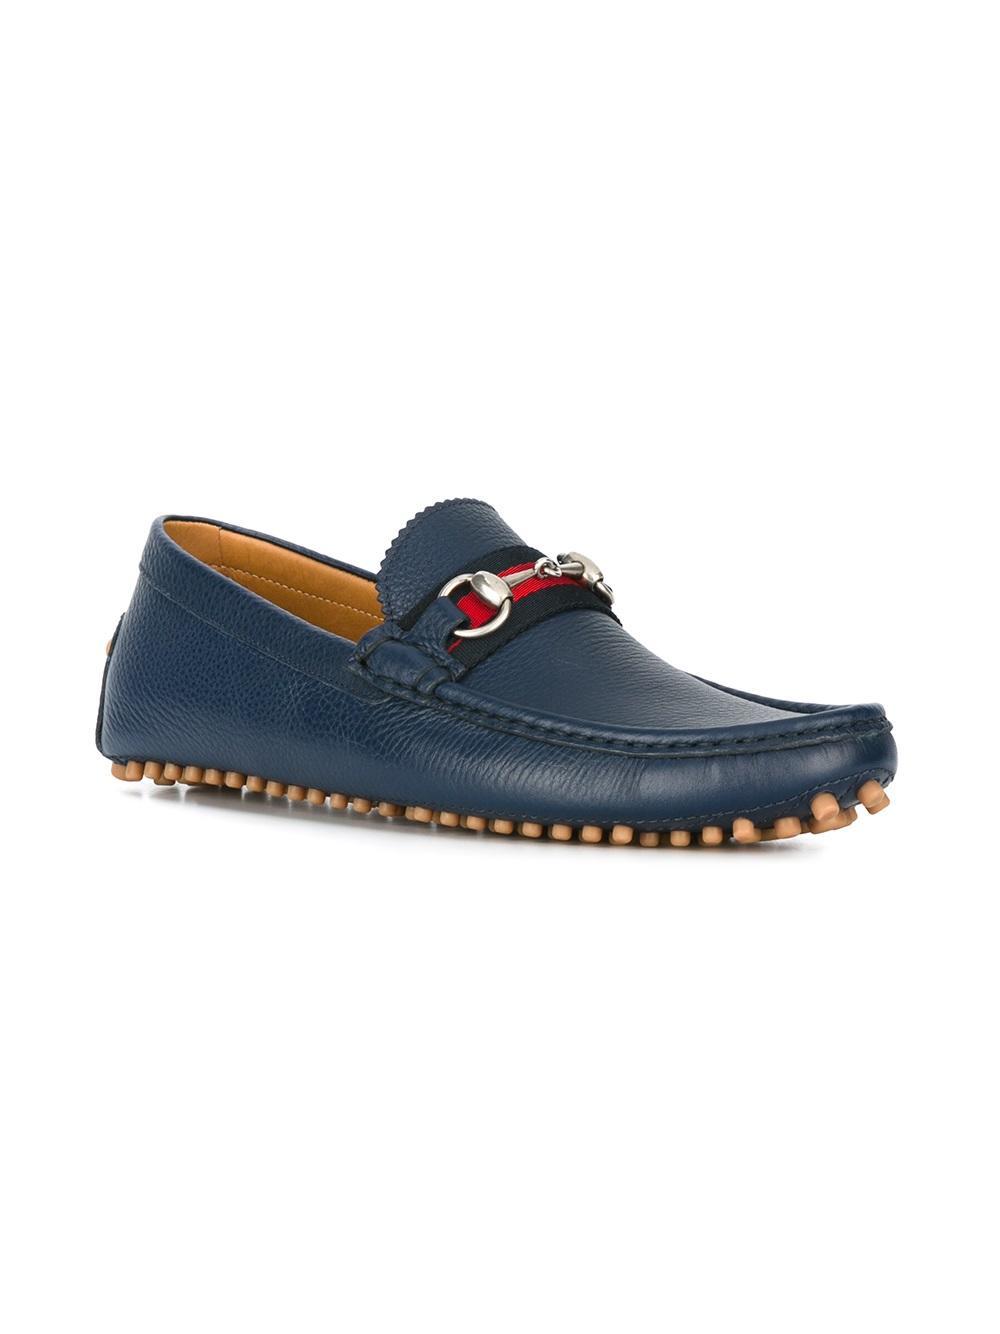 Lyst - Gucci Web Horsebit Driving Loafers in Blue